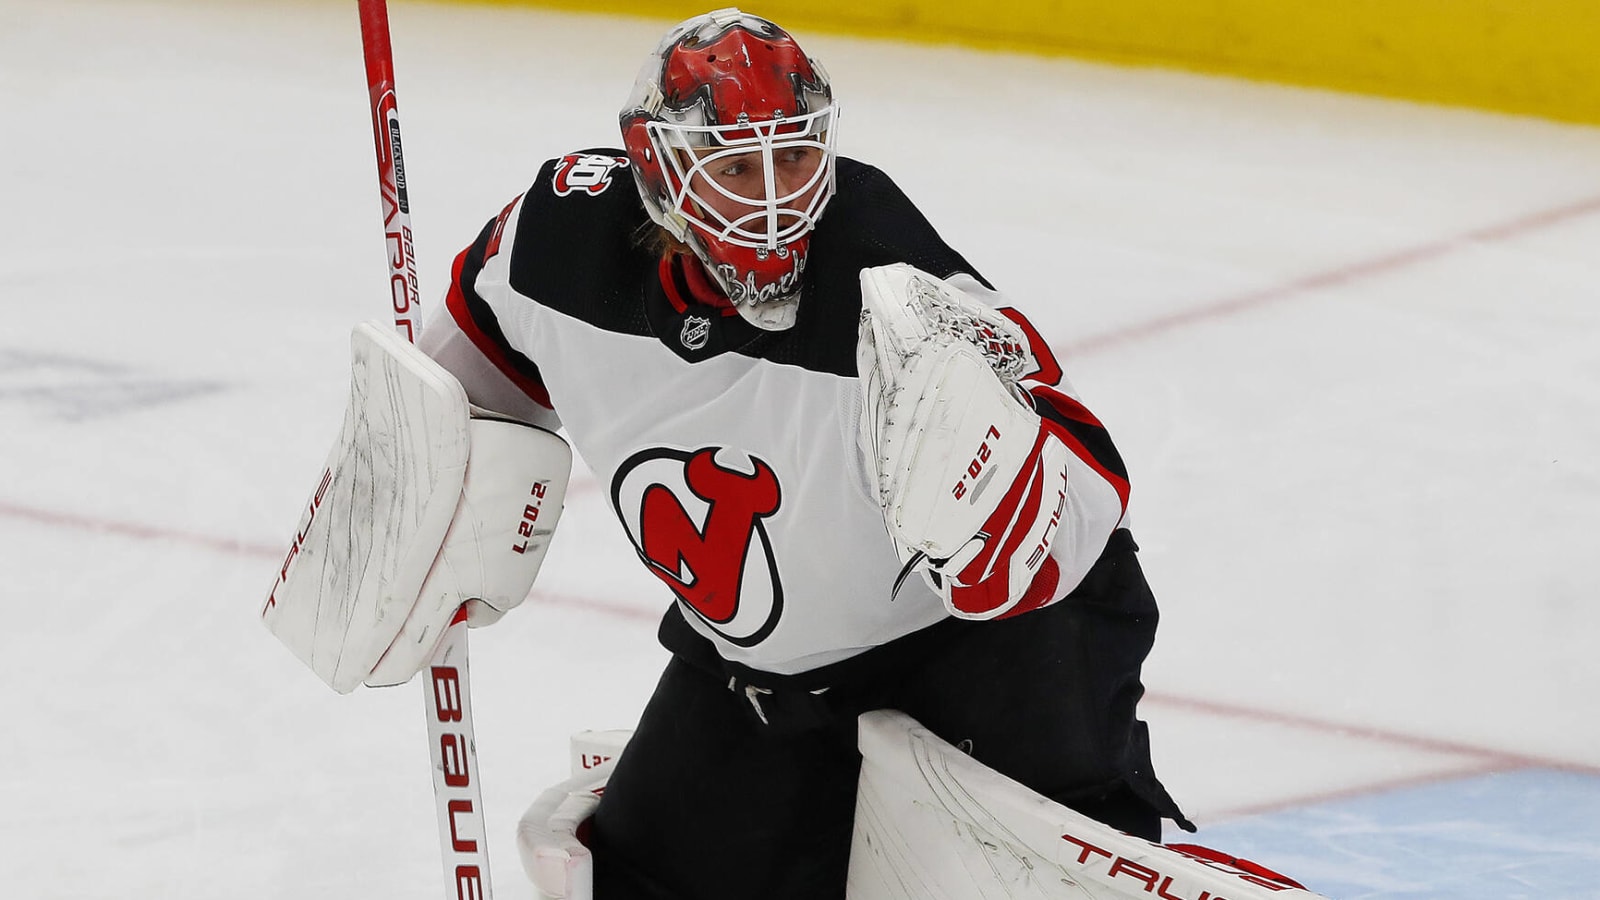 Devils goalie recalled from conditioning stint